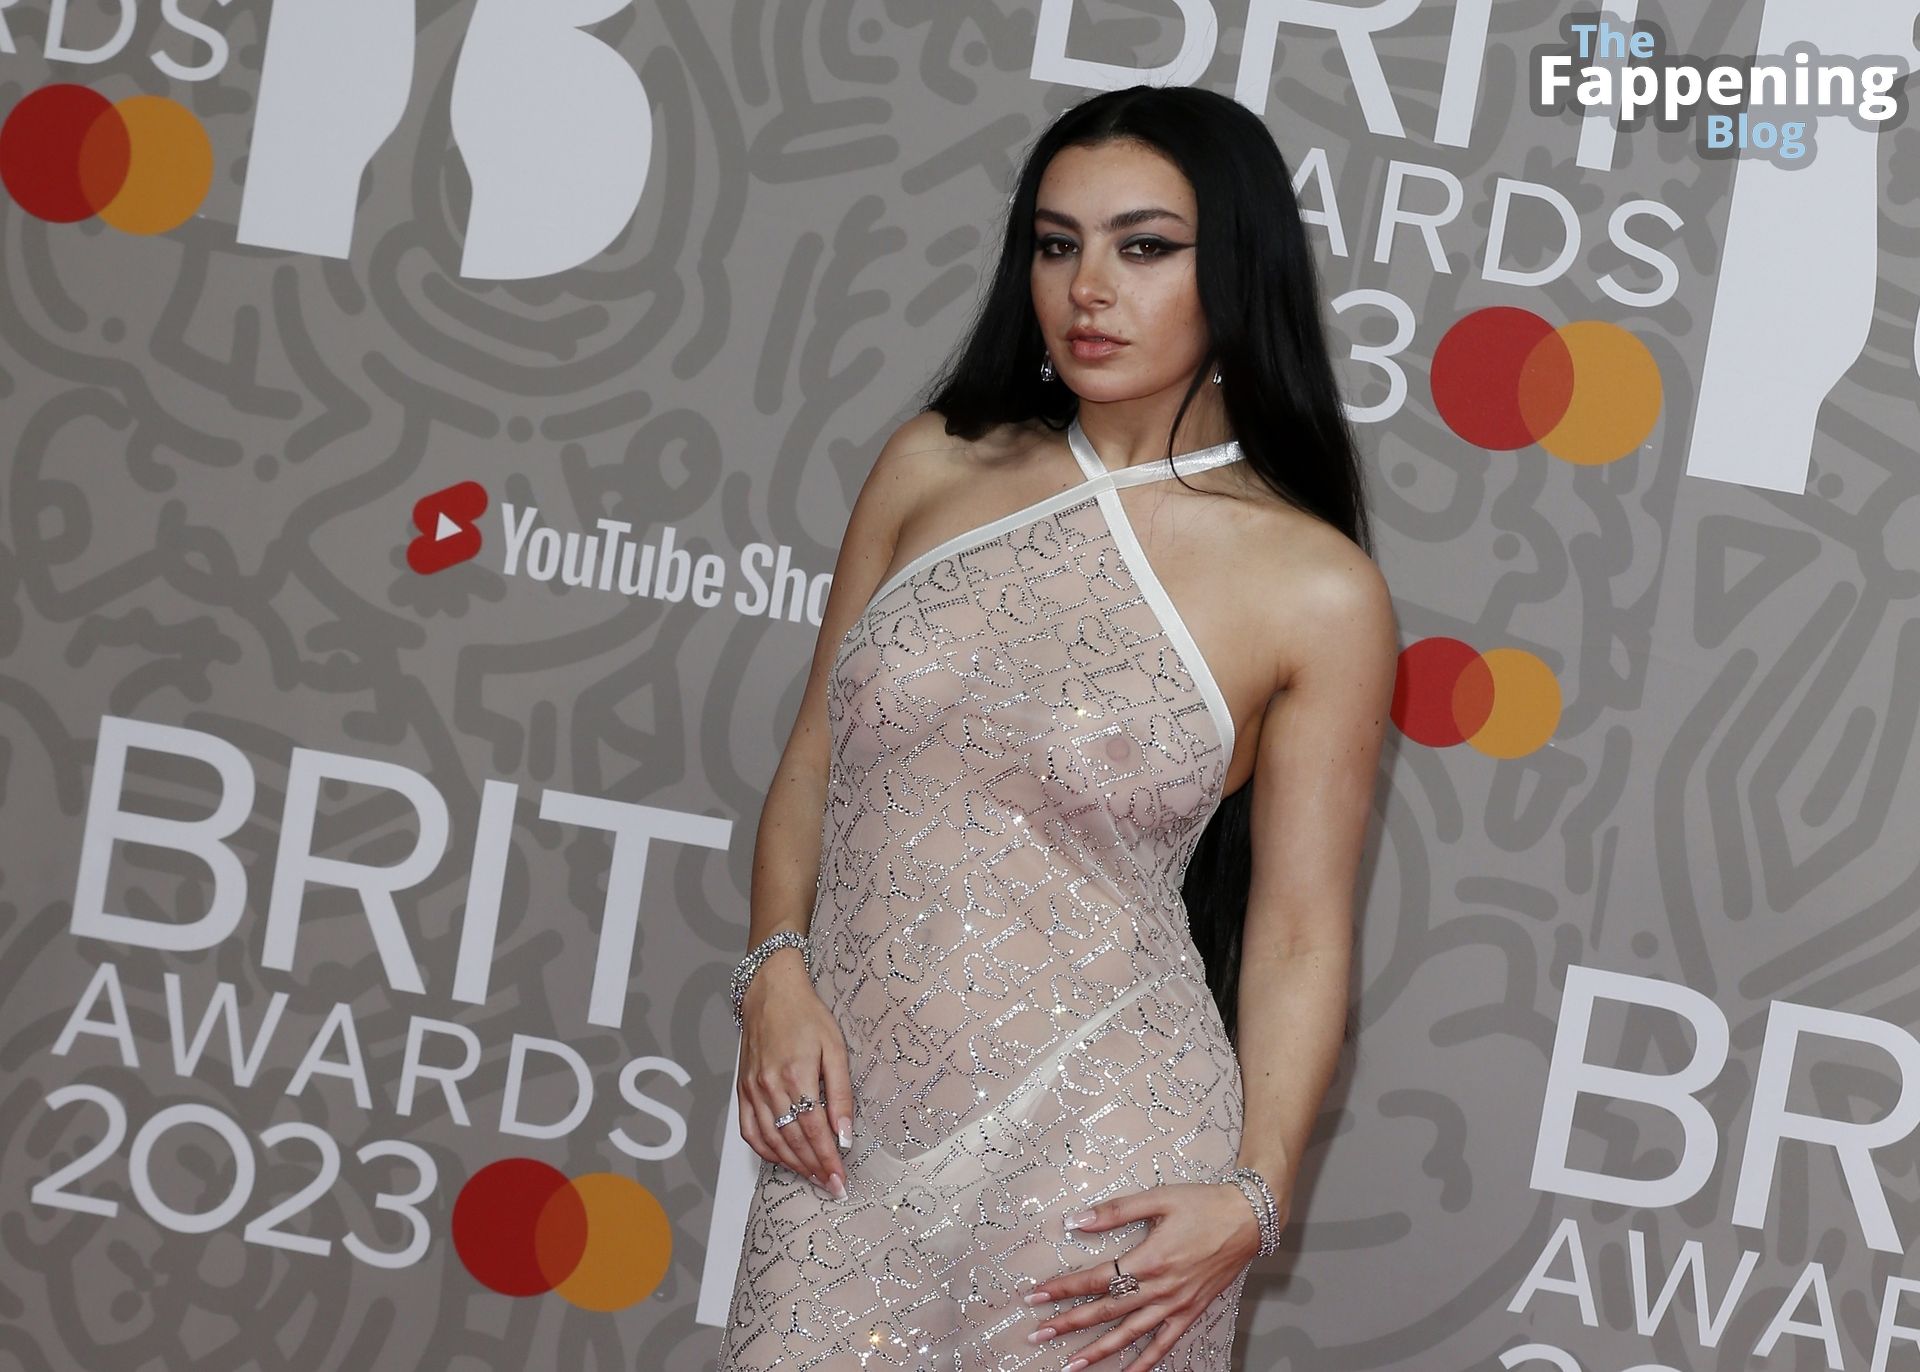 Charli-XCX-See-Through-Nudity-The-Fappening-Blog-86.jpg